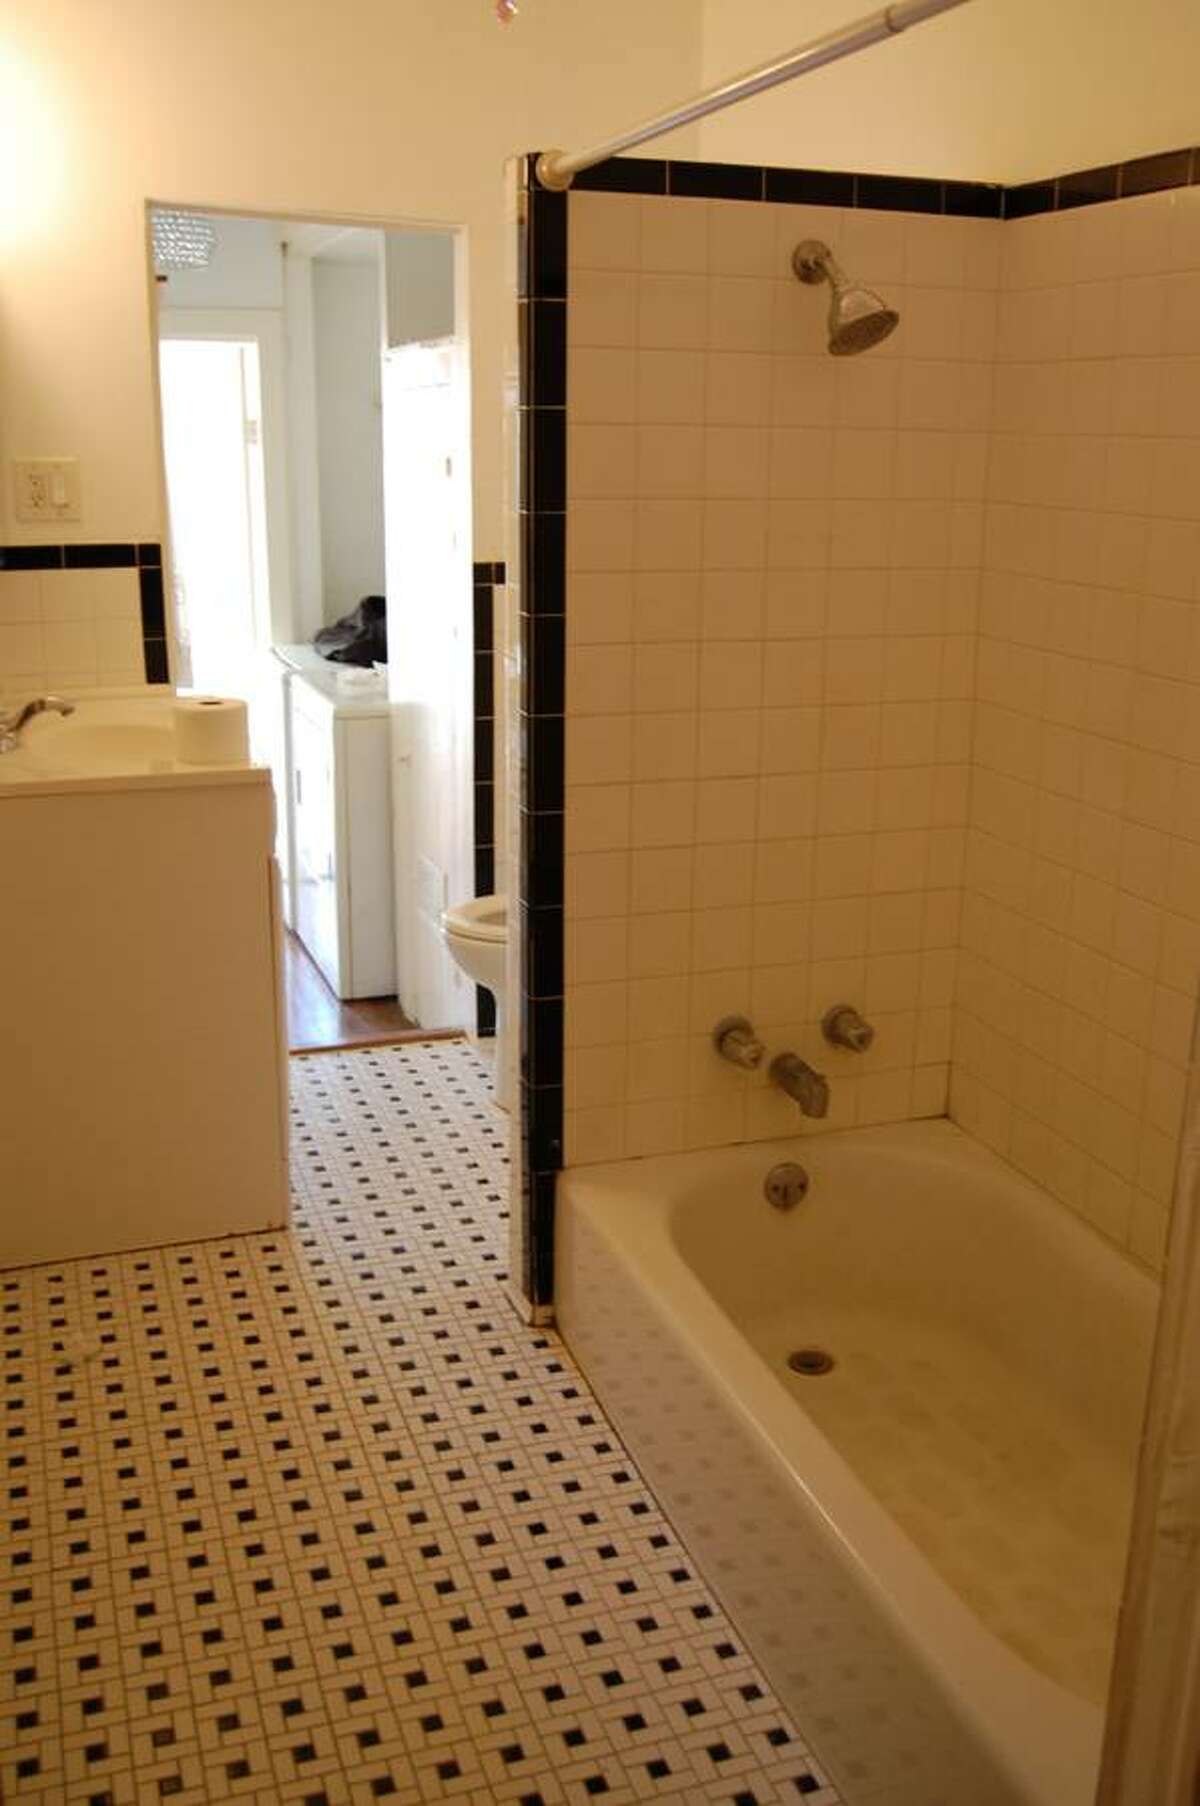 The bathroom looks a little cramped, but we'll forgive it for the tilework.